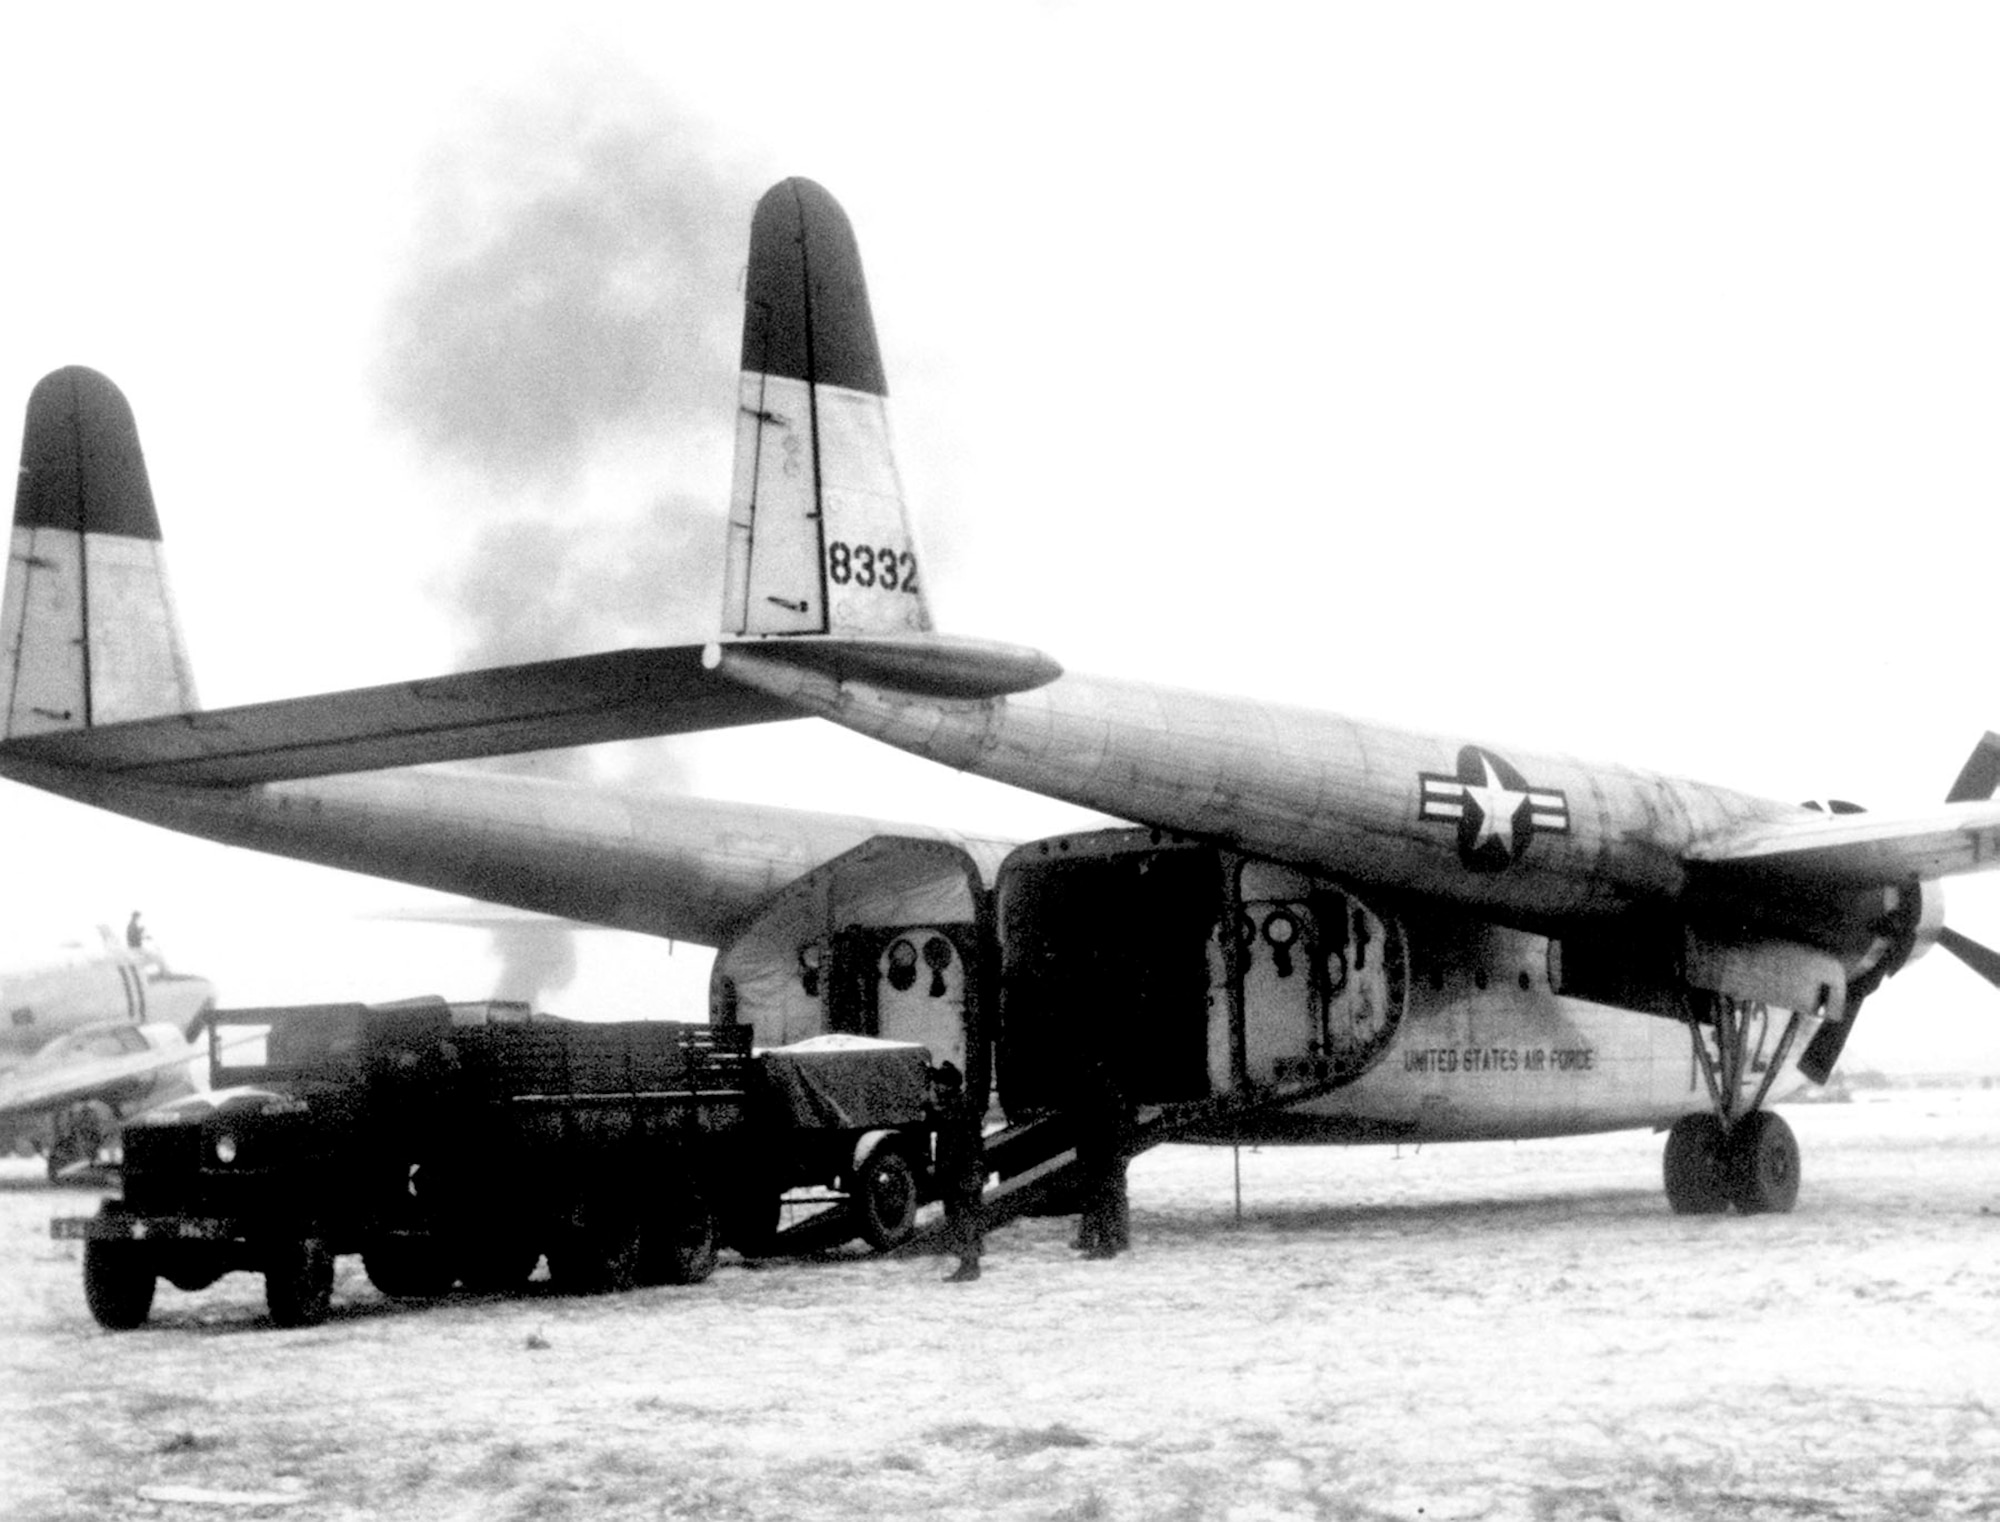 Rugged, versatile C-119 Flying Boxcars were instrumental in Combat Cargo operations. They were designed for easy loading and large capacity. (U.S. Air Force photo)